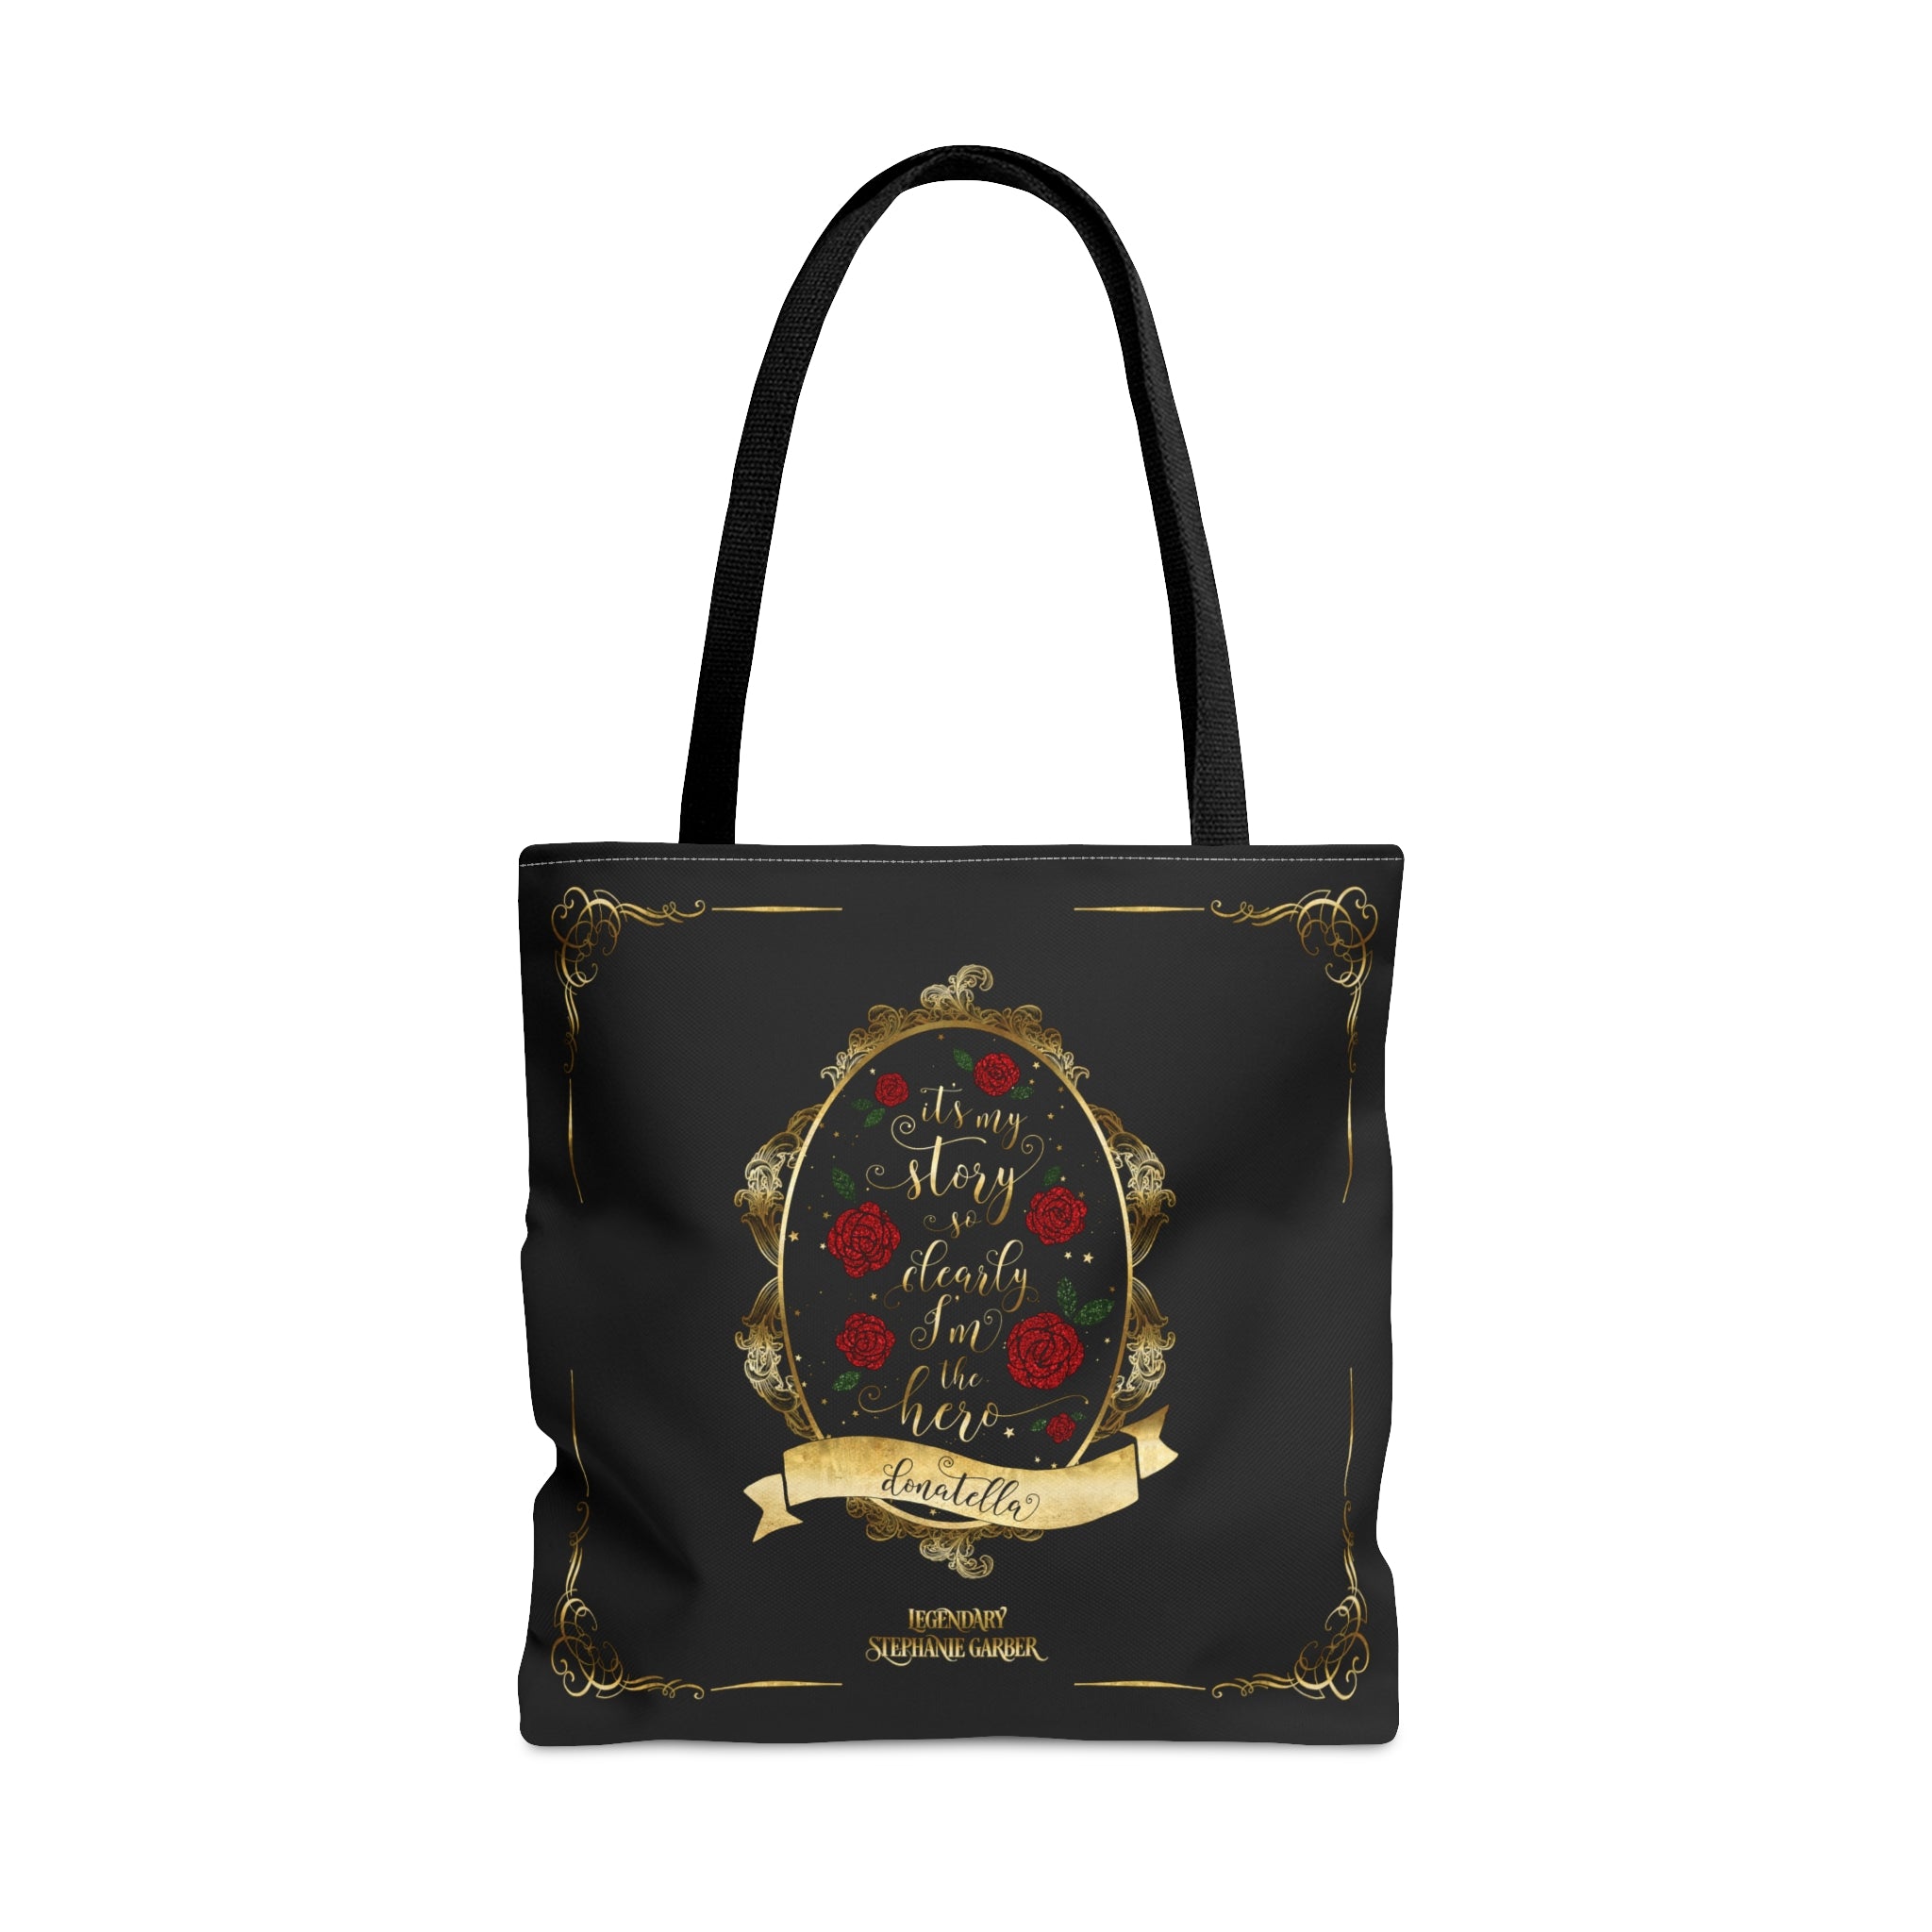 It's my story... Caraval Tote Bag